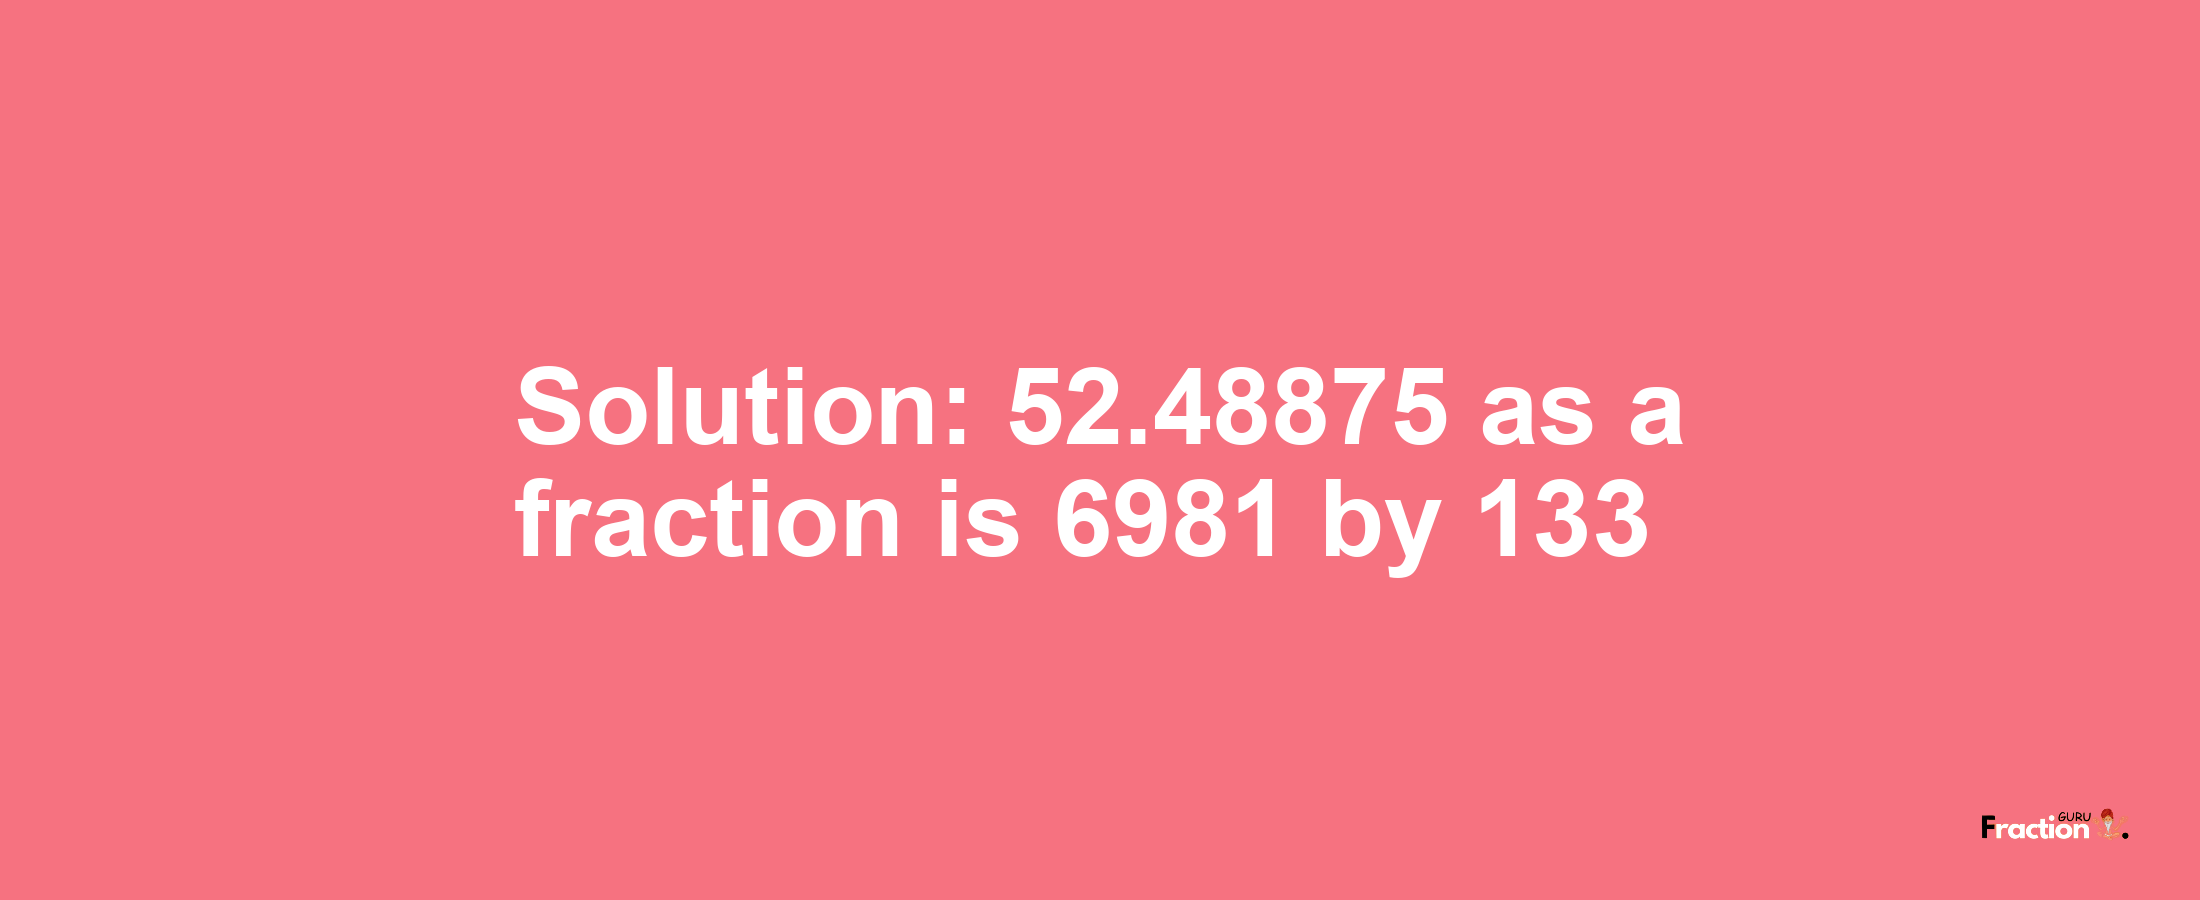 Solution:52.48875 as a fraction is 6981/133